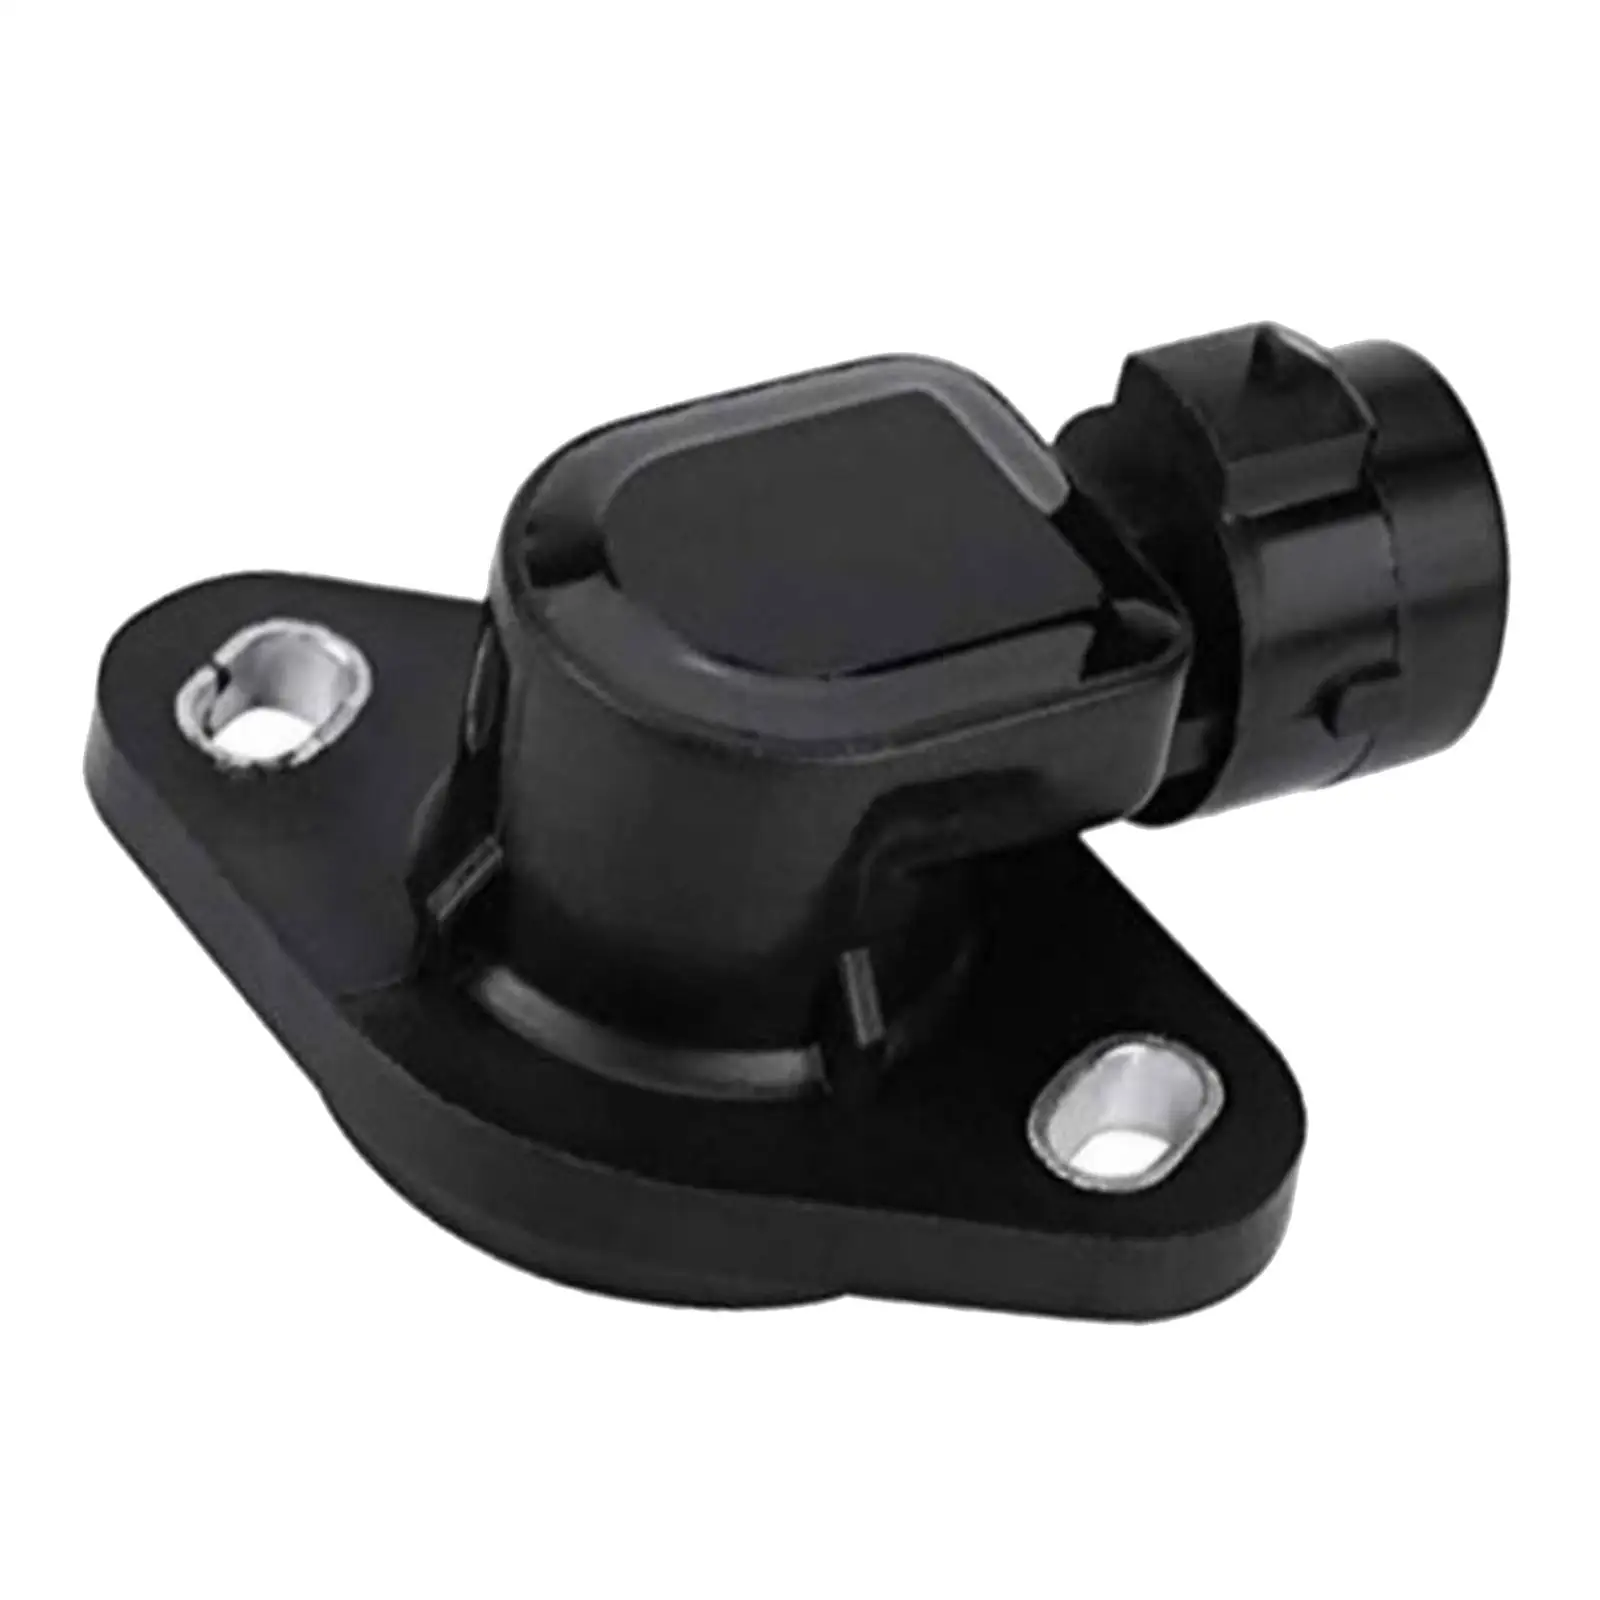 Throttle Position Sensor Fit for Accord 1990-2002 Replacement ACC